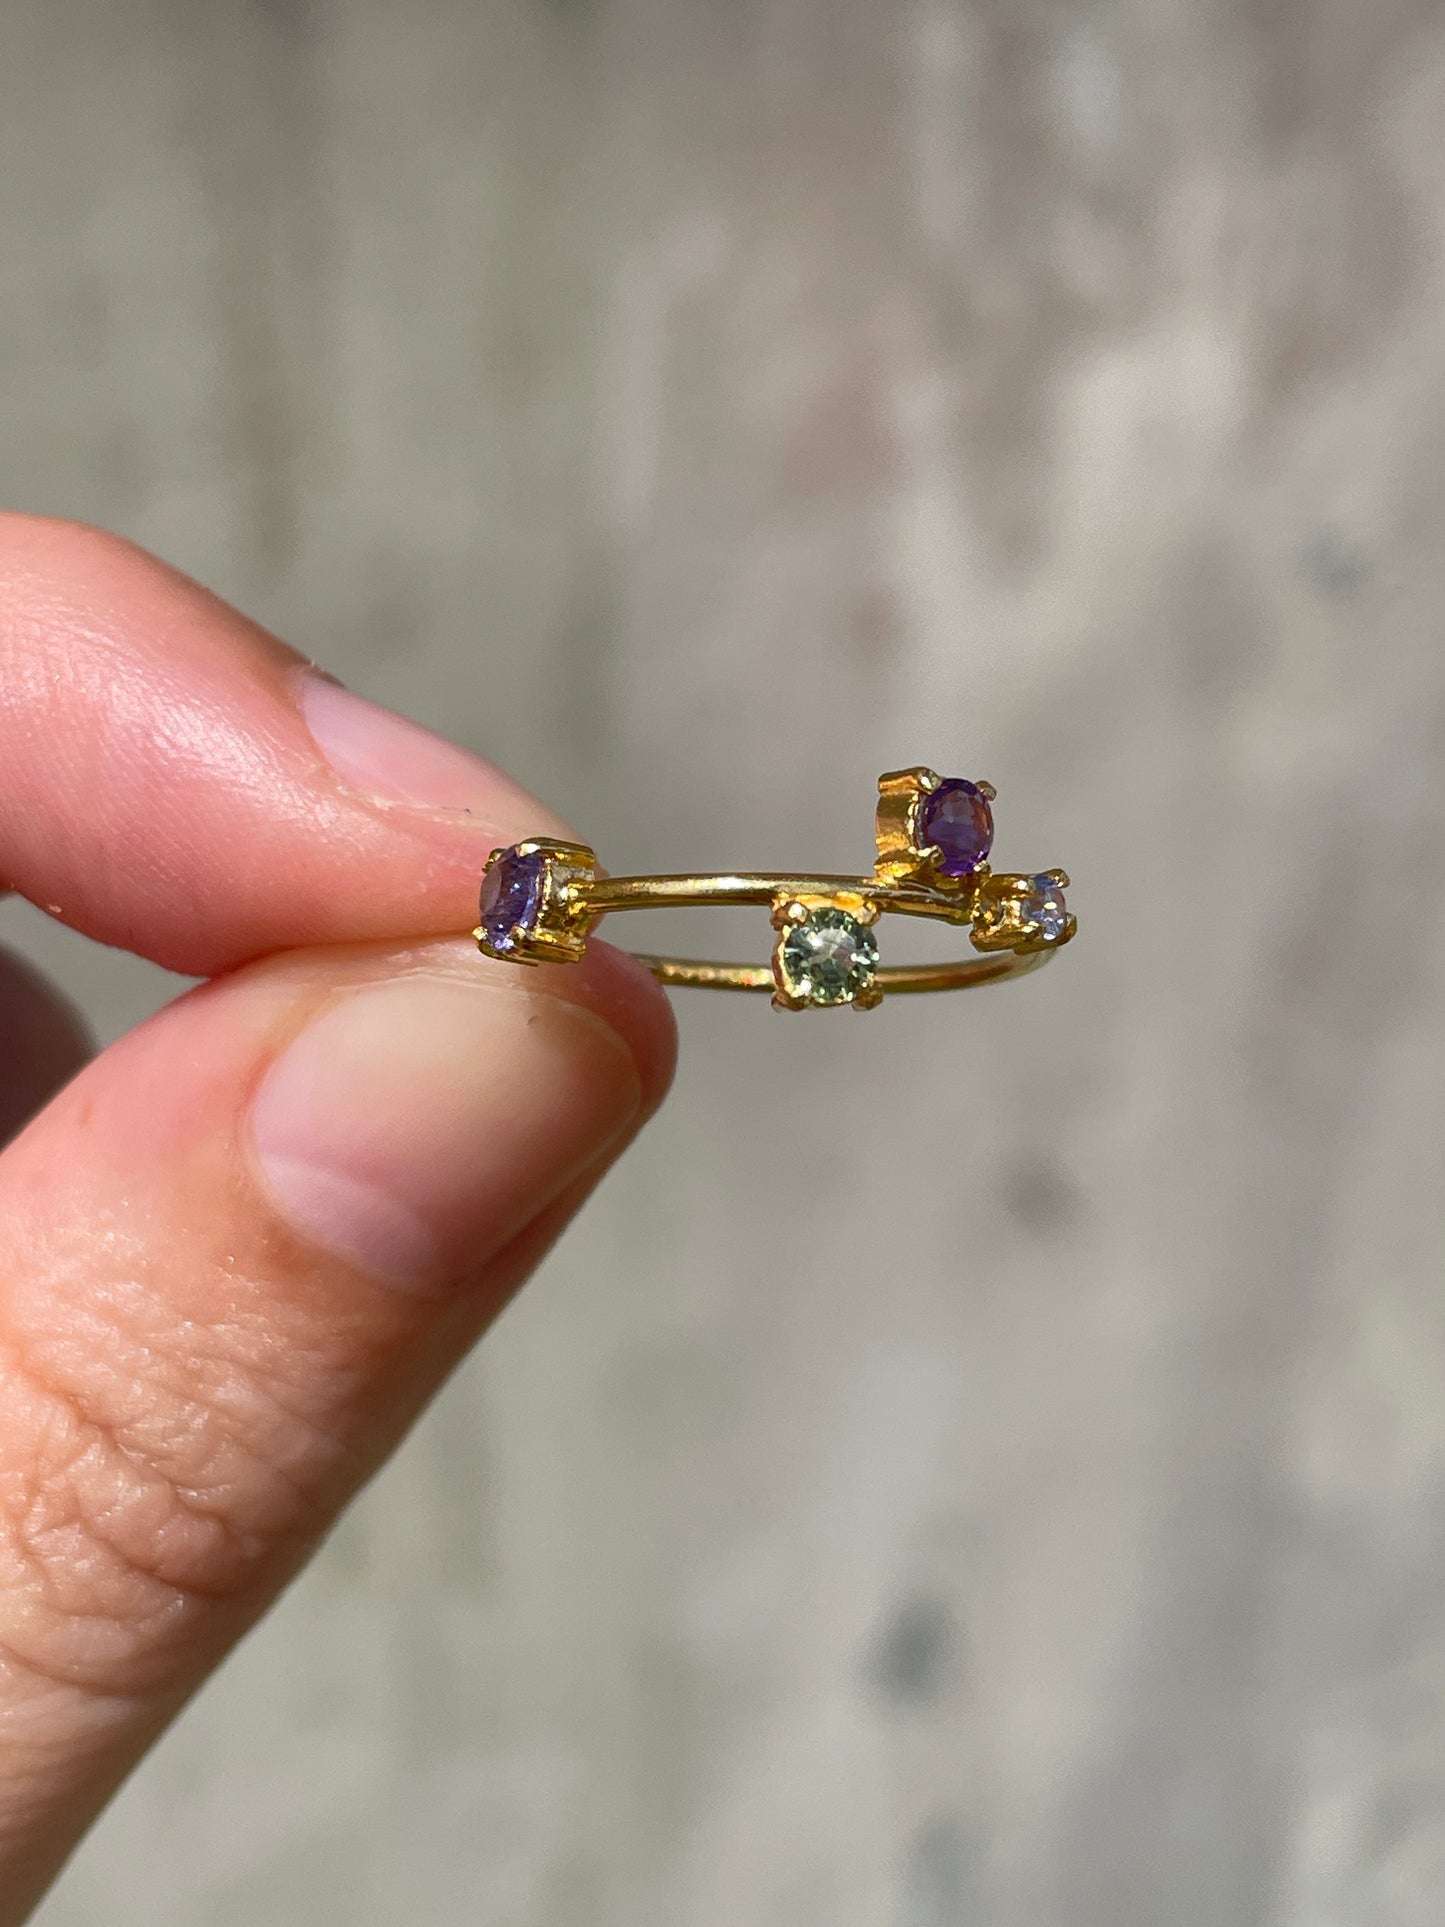 Galaxy Ring Gold with Violet Sapphires - size 7.5